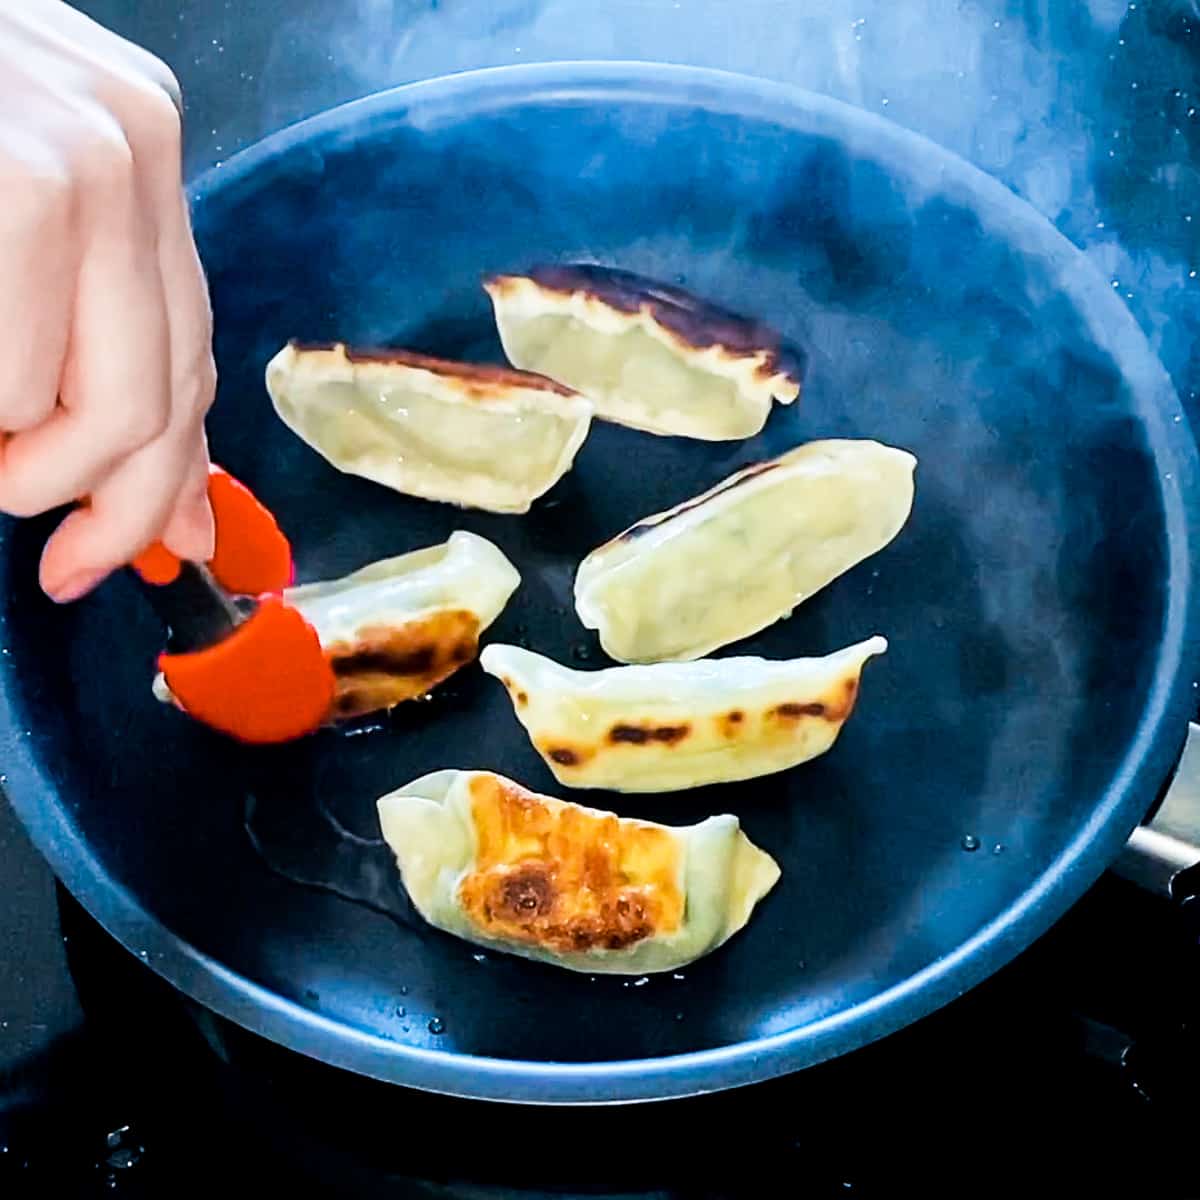 https://sipbitego.com/wp-content/uploads/2021/05/steps-1-Cooking-Trader-Joes-Vegetable-Gyoza-searing-in-a-pan-feature.jpg